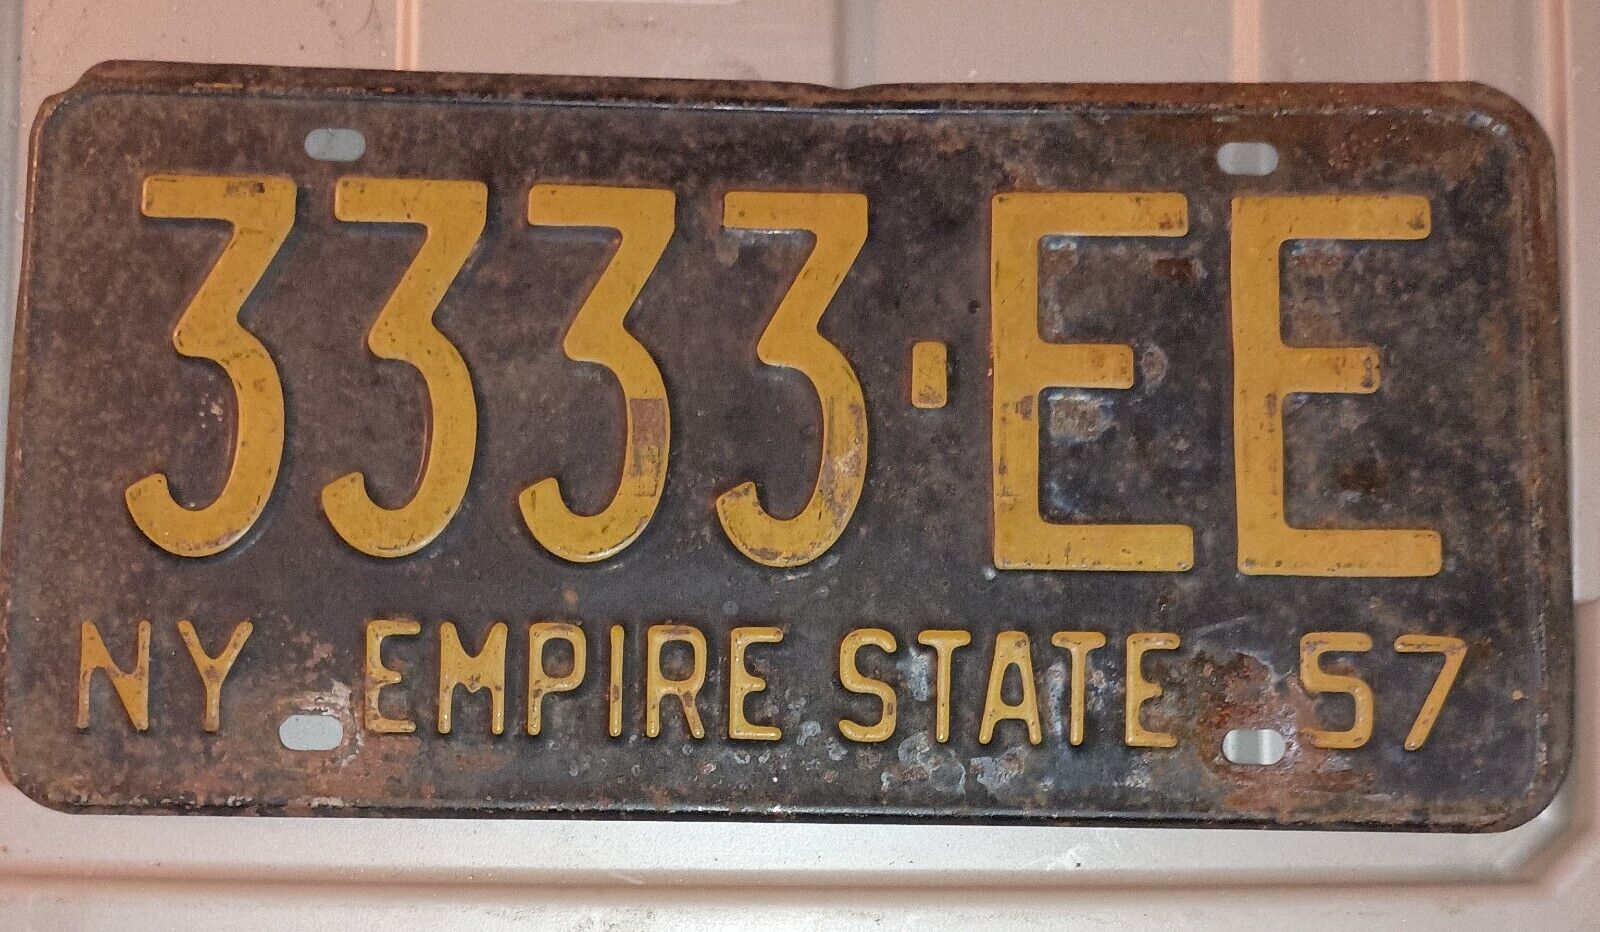 957 New York Empire State License Plate #3333-EE Rare Find